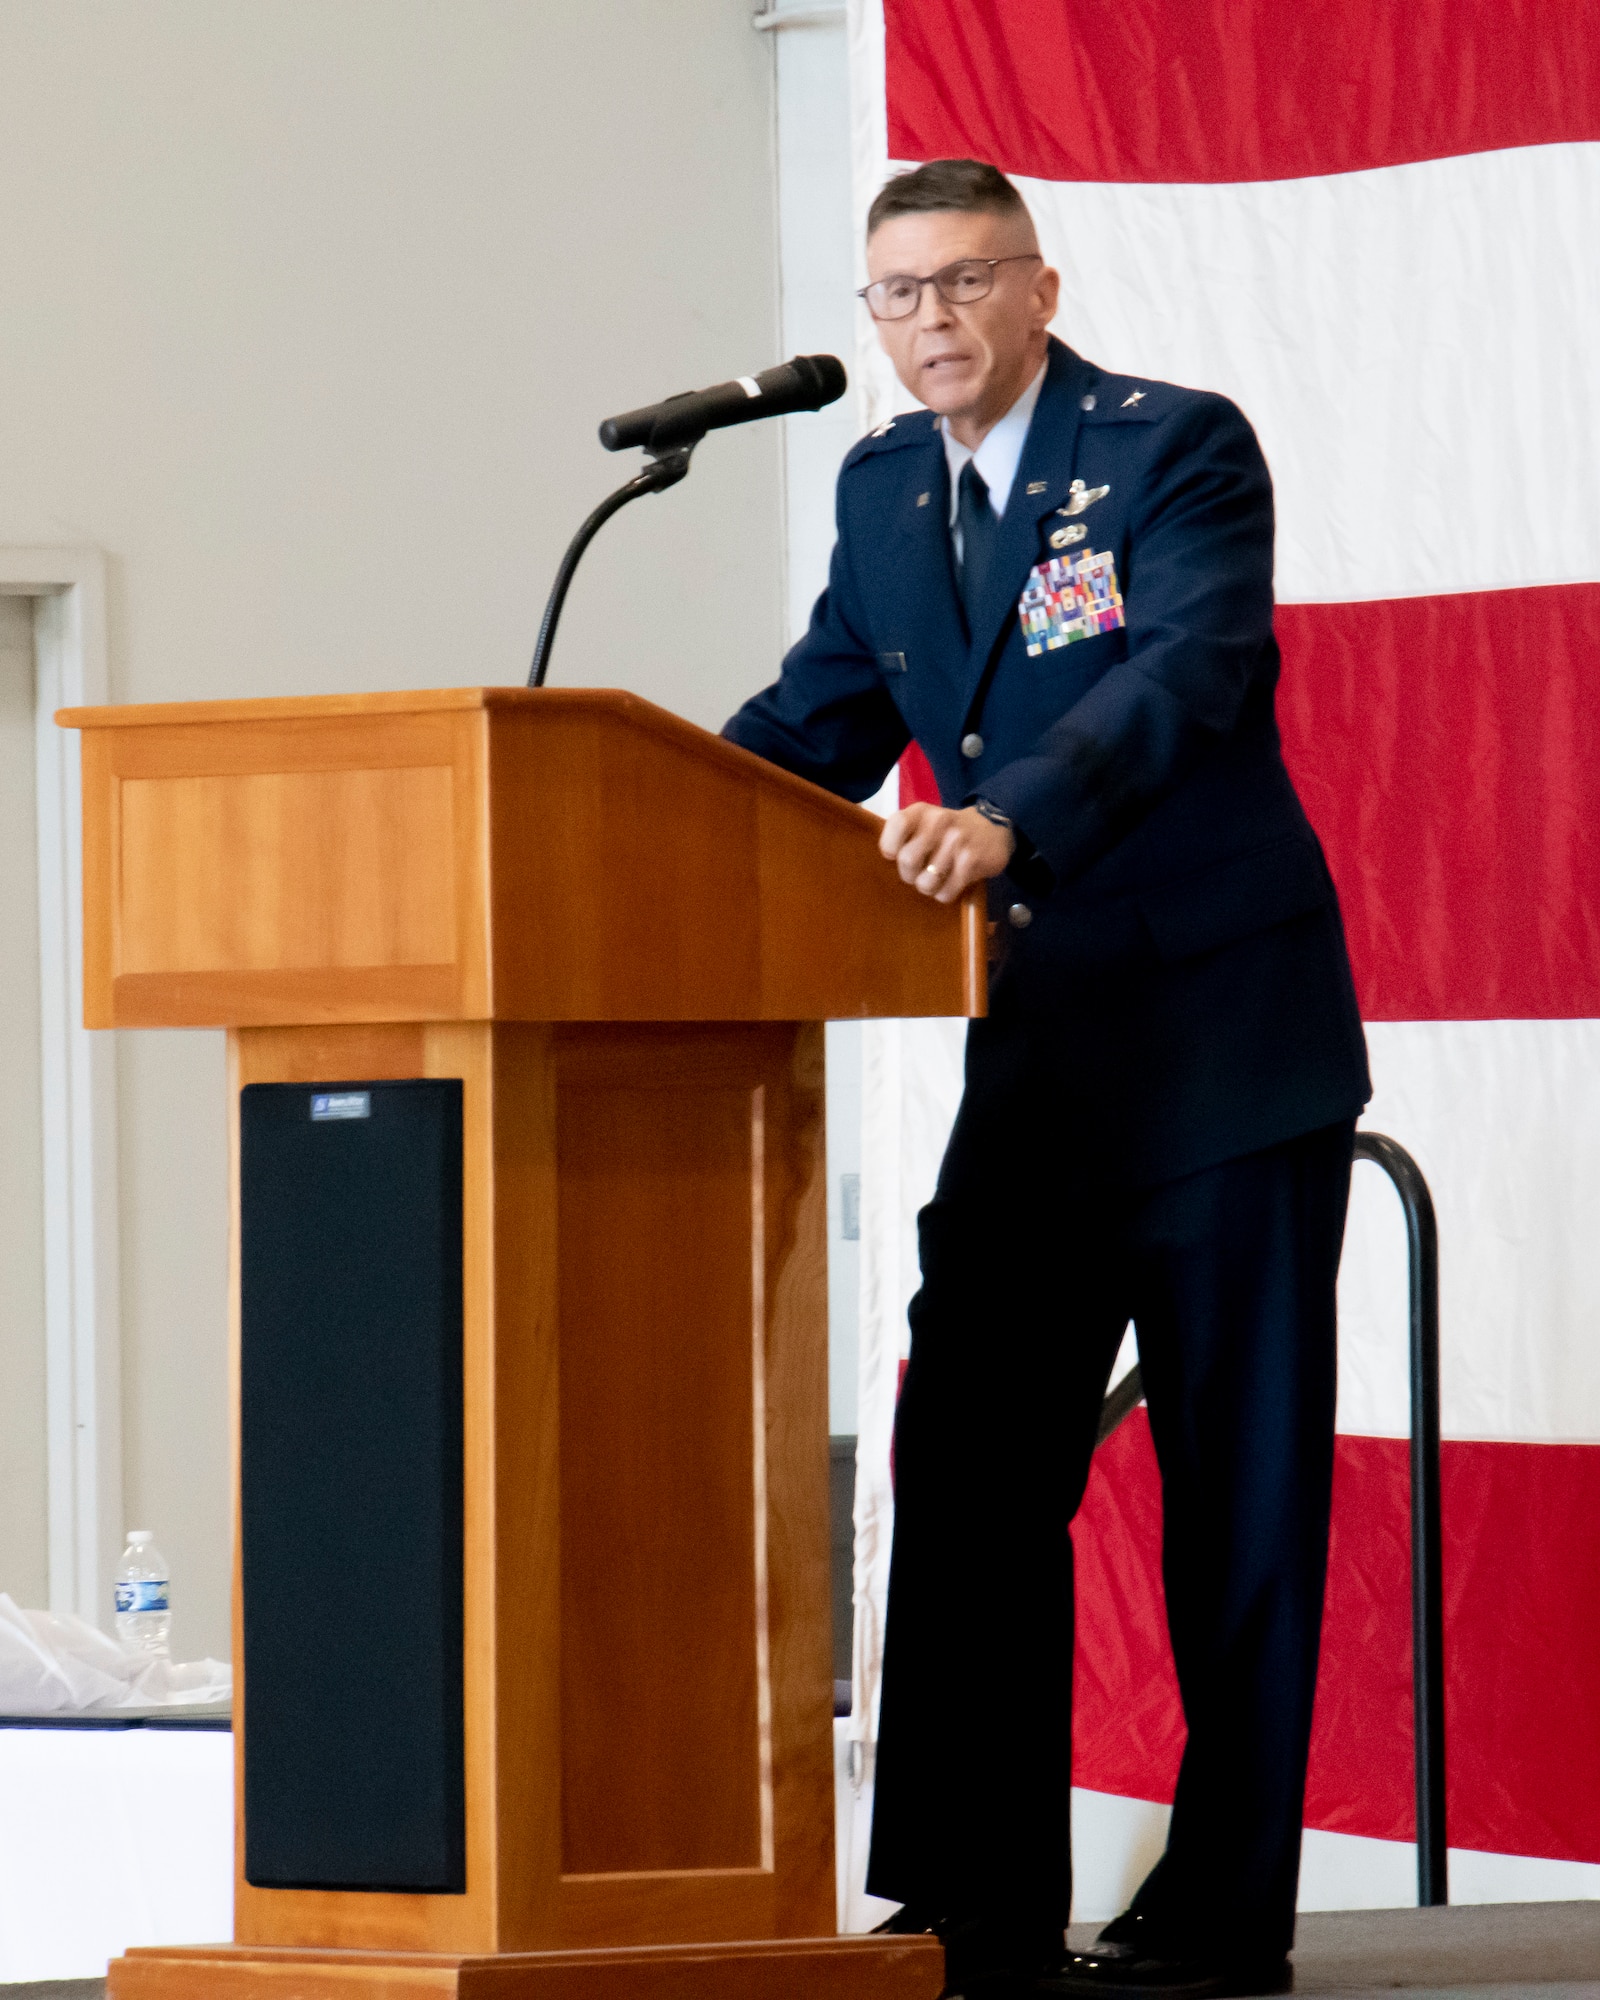 Service member leans on podium while speaking.